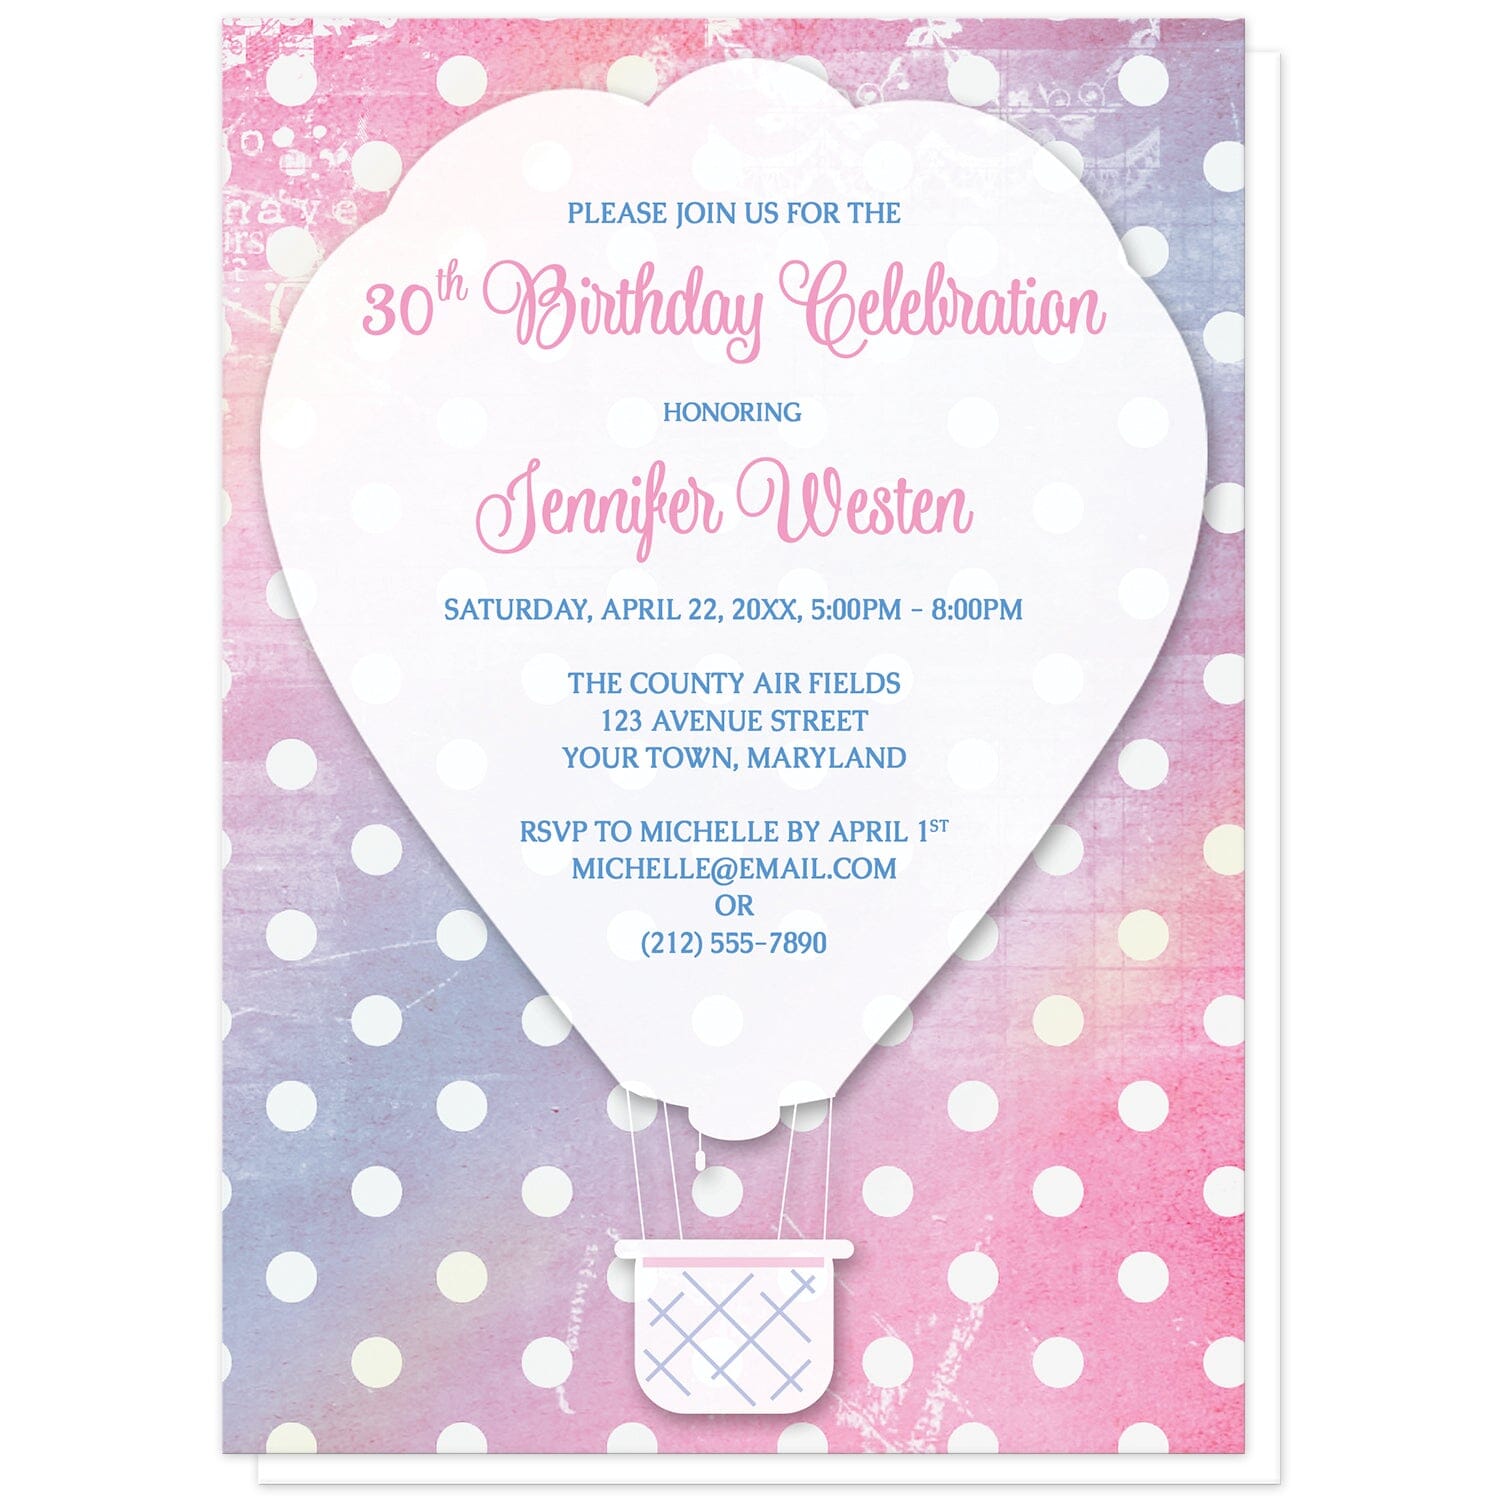 Pink Polka Dot Hot Air Balloon Birthday Invitations at Artistically Invited. Whimsical pink polka dot hot air balloon birthday invitations with a white silhouette hot air balloon over a pink, blue, and yellow rustic background covered in a white polka dot pattern. Your personalized birthday details are custom printed in pink and blue over the white hot air balloon. 